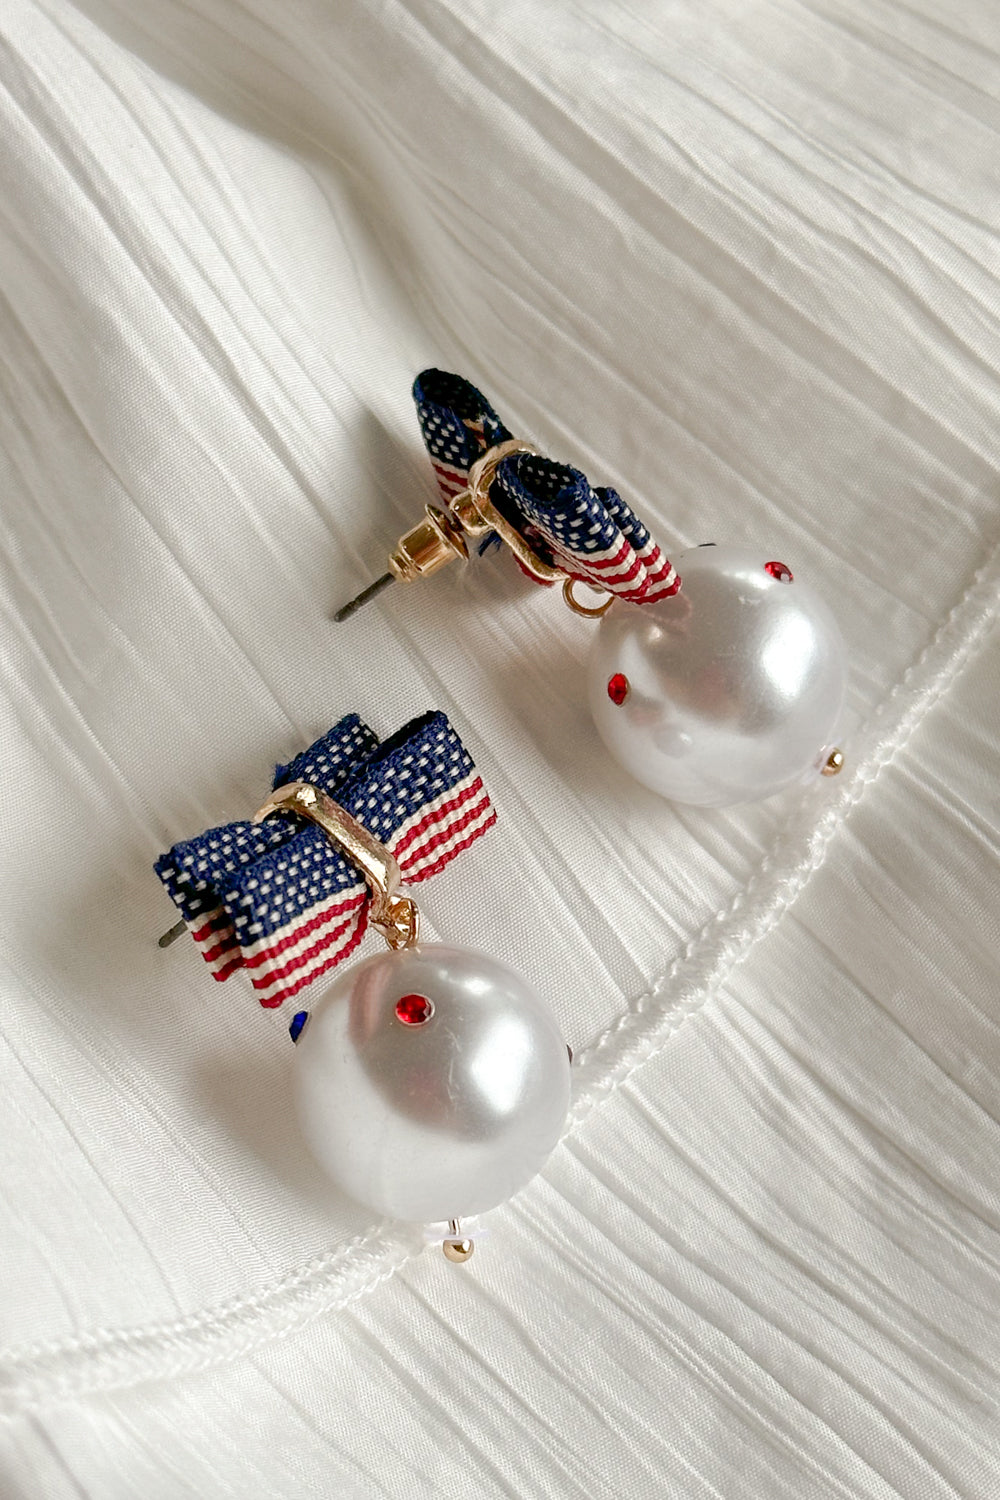 Close-up image of the Betsy Red, White, & Blue Pearl Earrings against a white background. Earrings have american flag bows and a pearl pendant with red white and blue stones. One is face up and one is sideways.